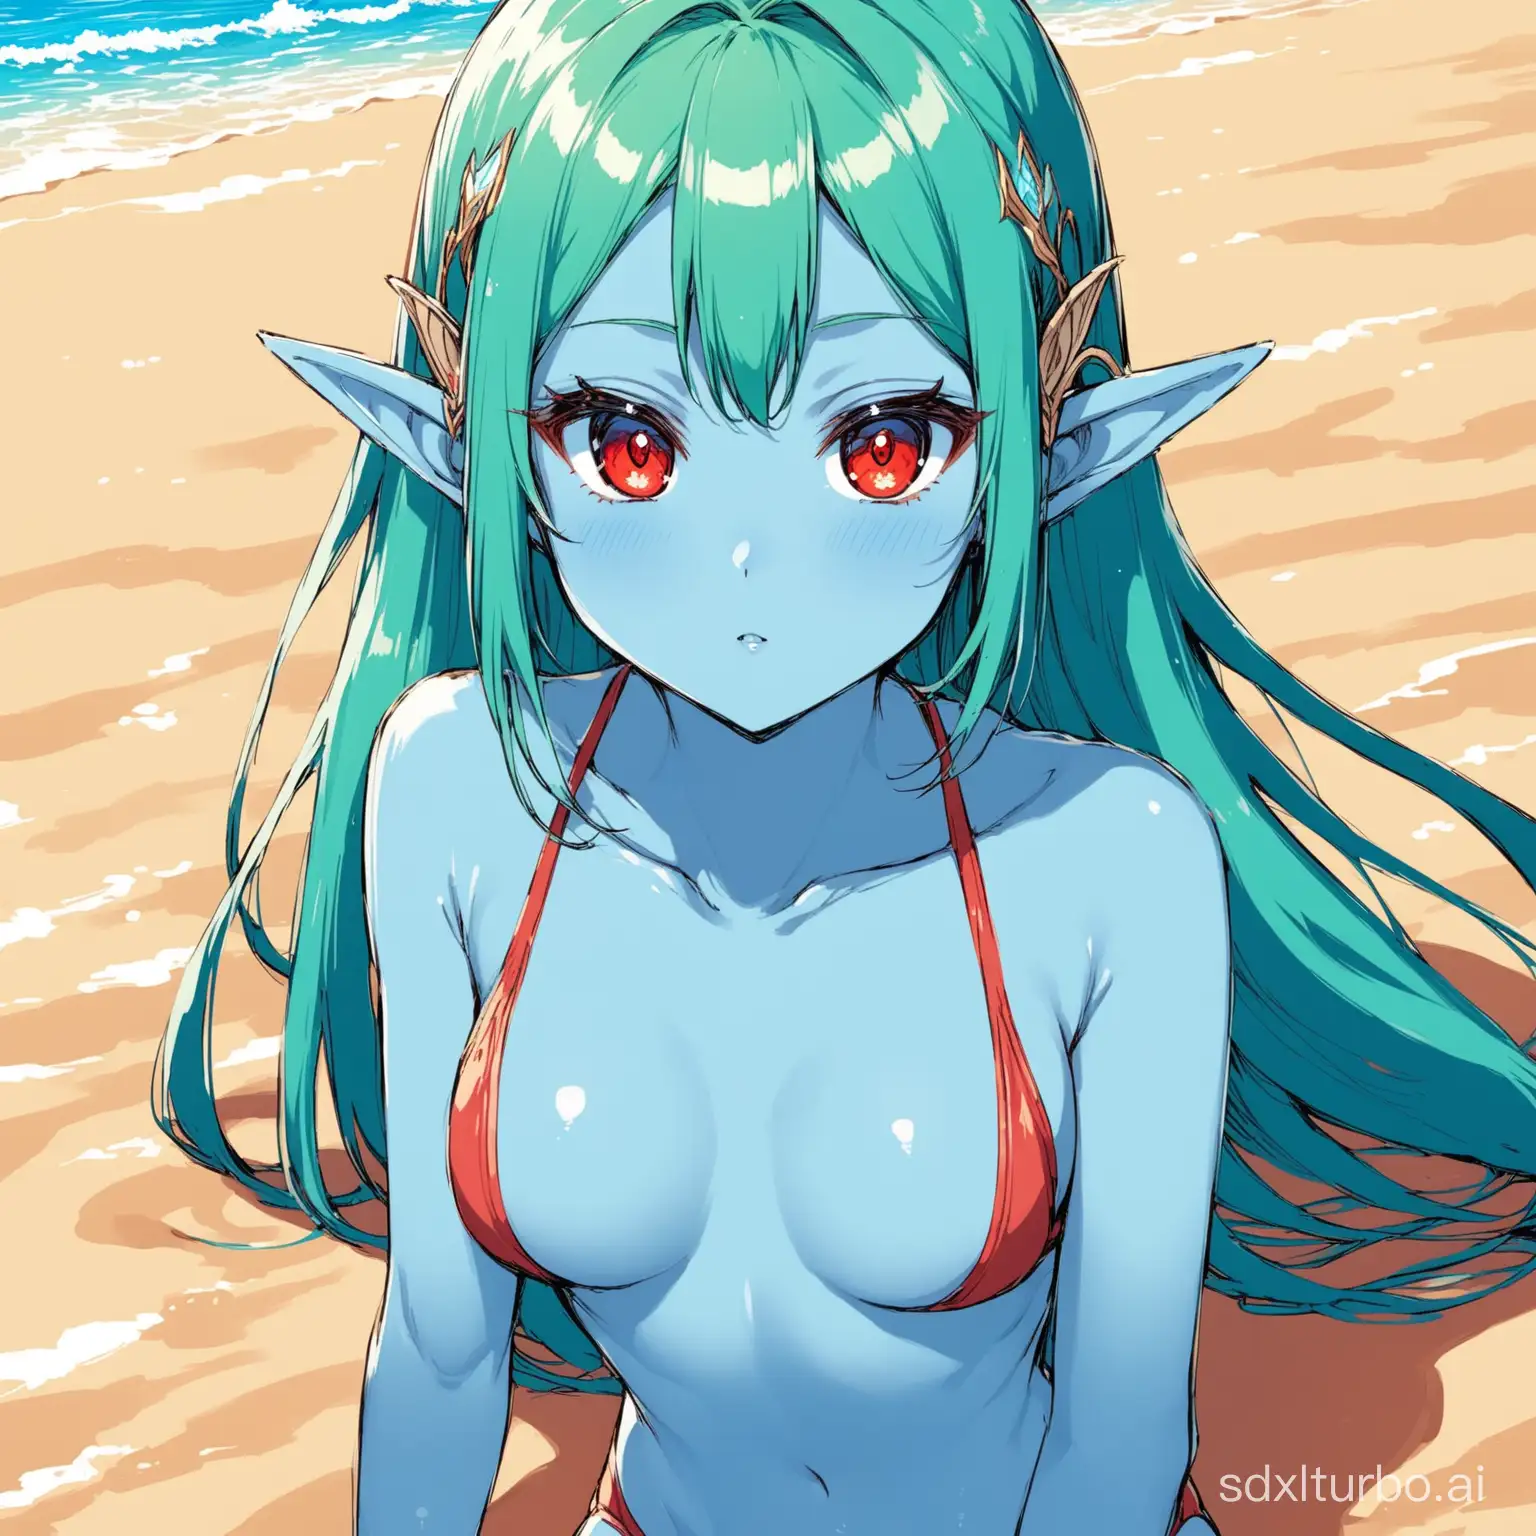 RedEyed-Anime-Girl-with-Elven-Ears-Relaxing-on-Beach-in-Blue-Swimsuit